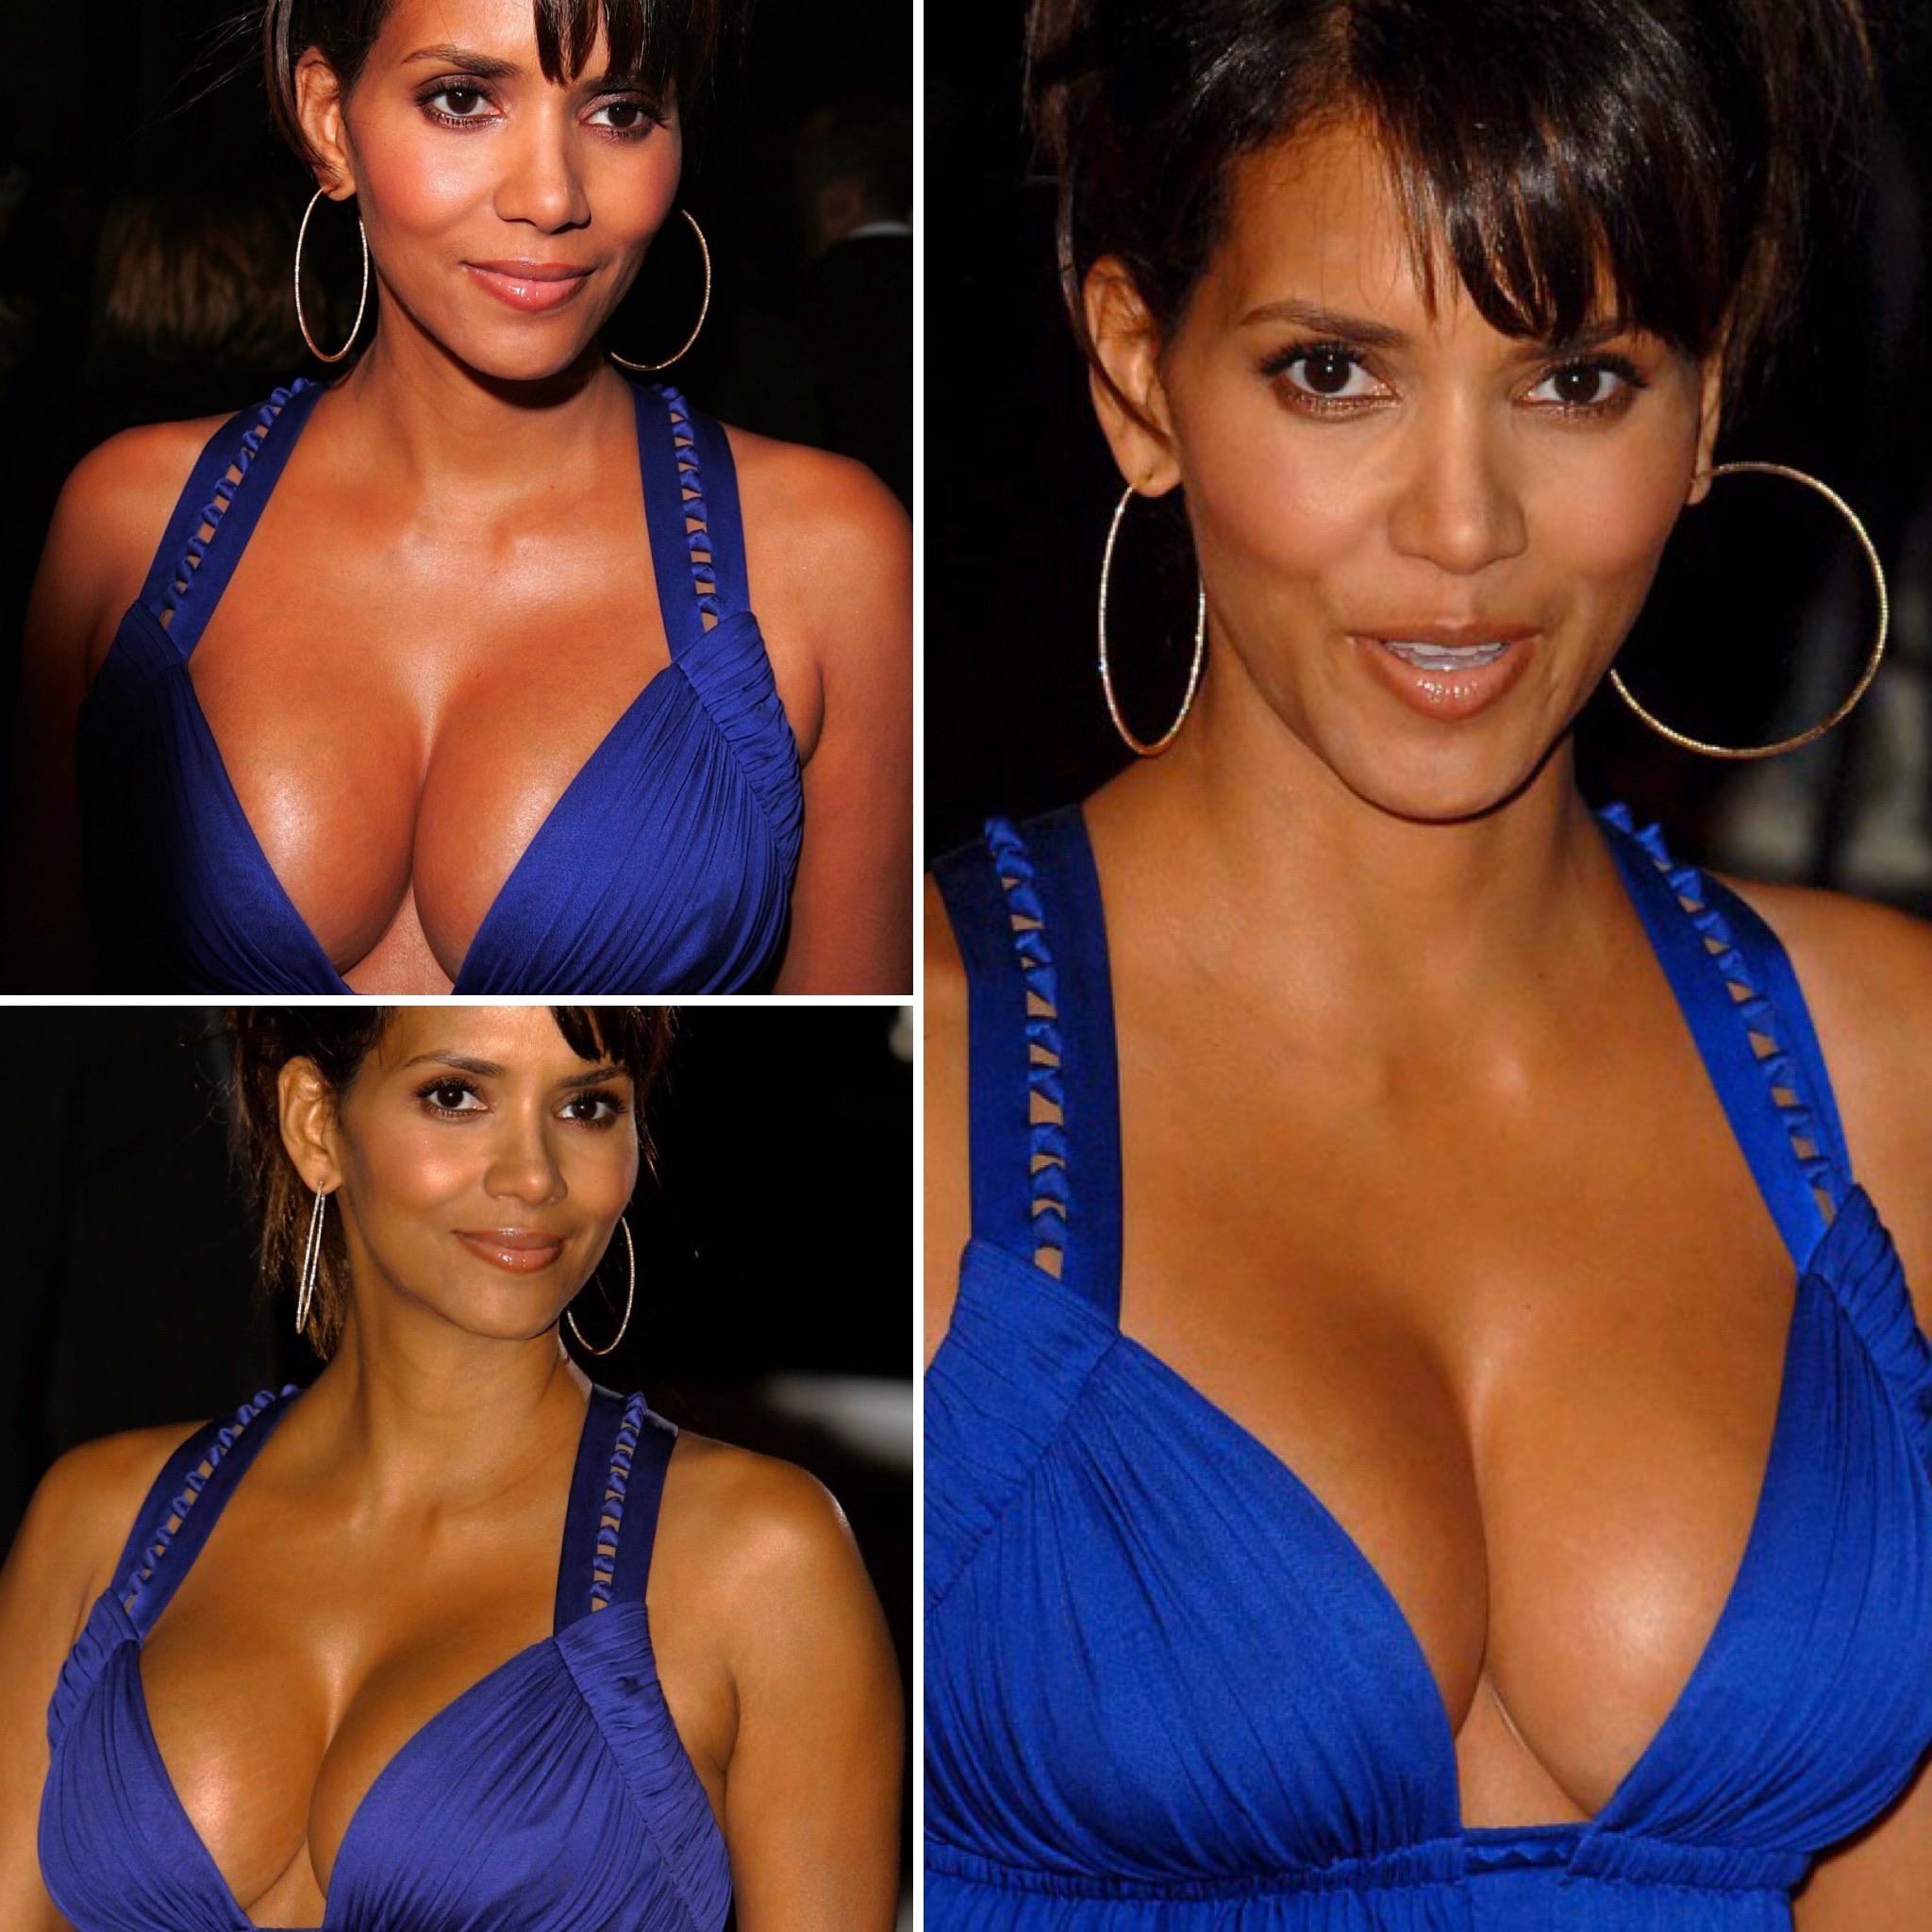 Halle Berry draining my nuts with these fat juicy tits